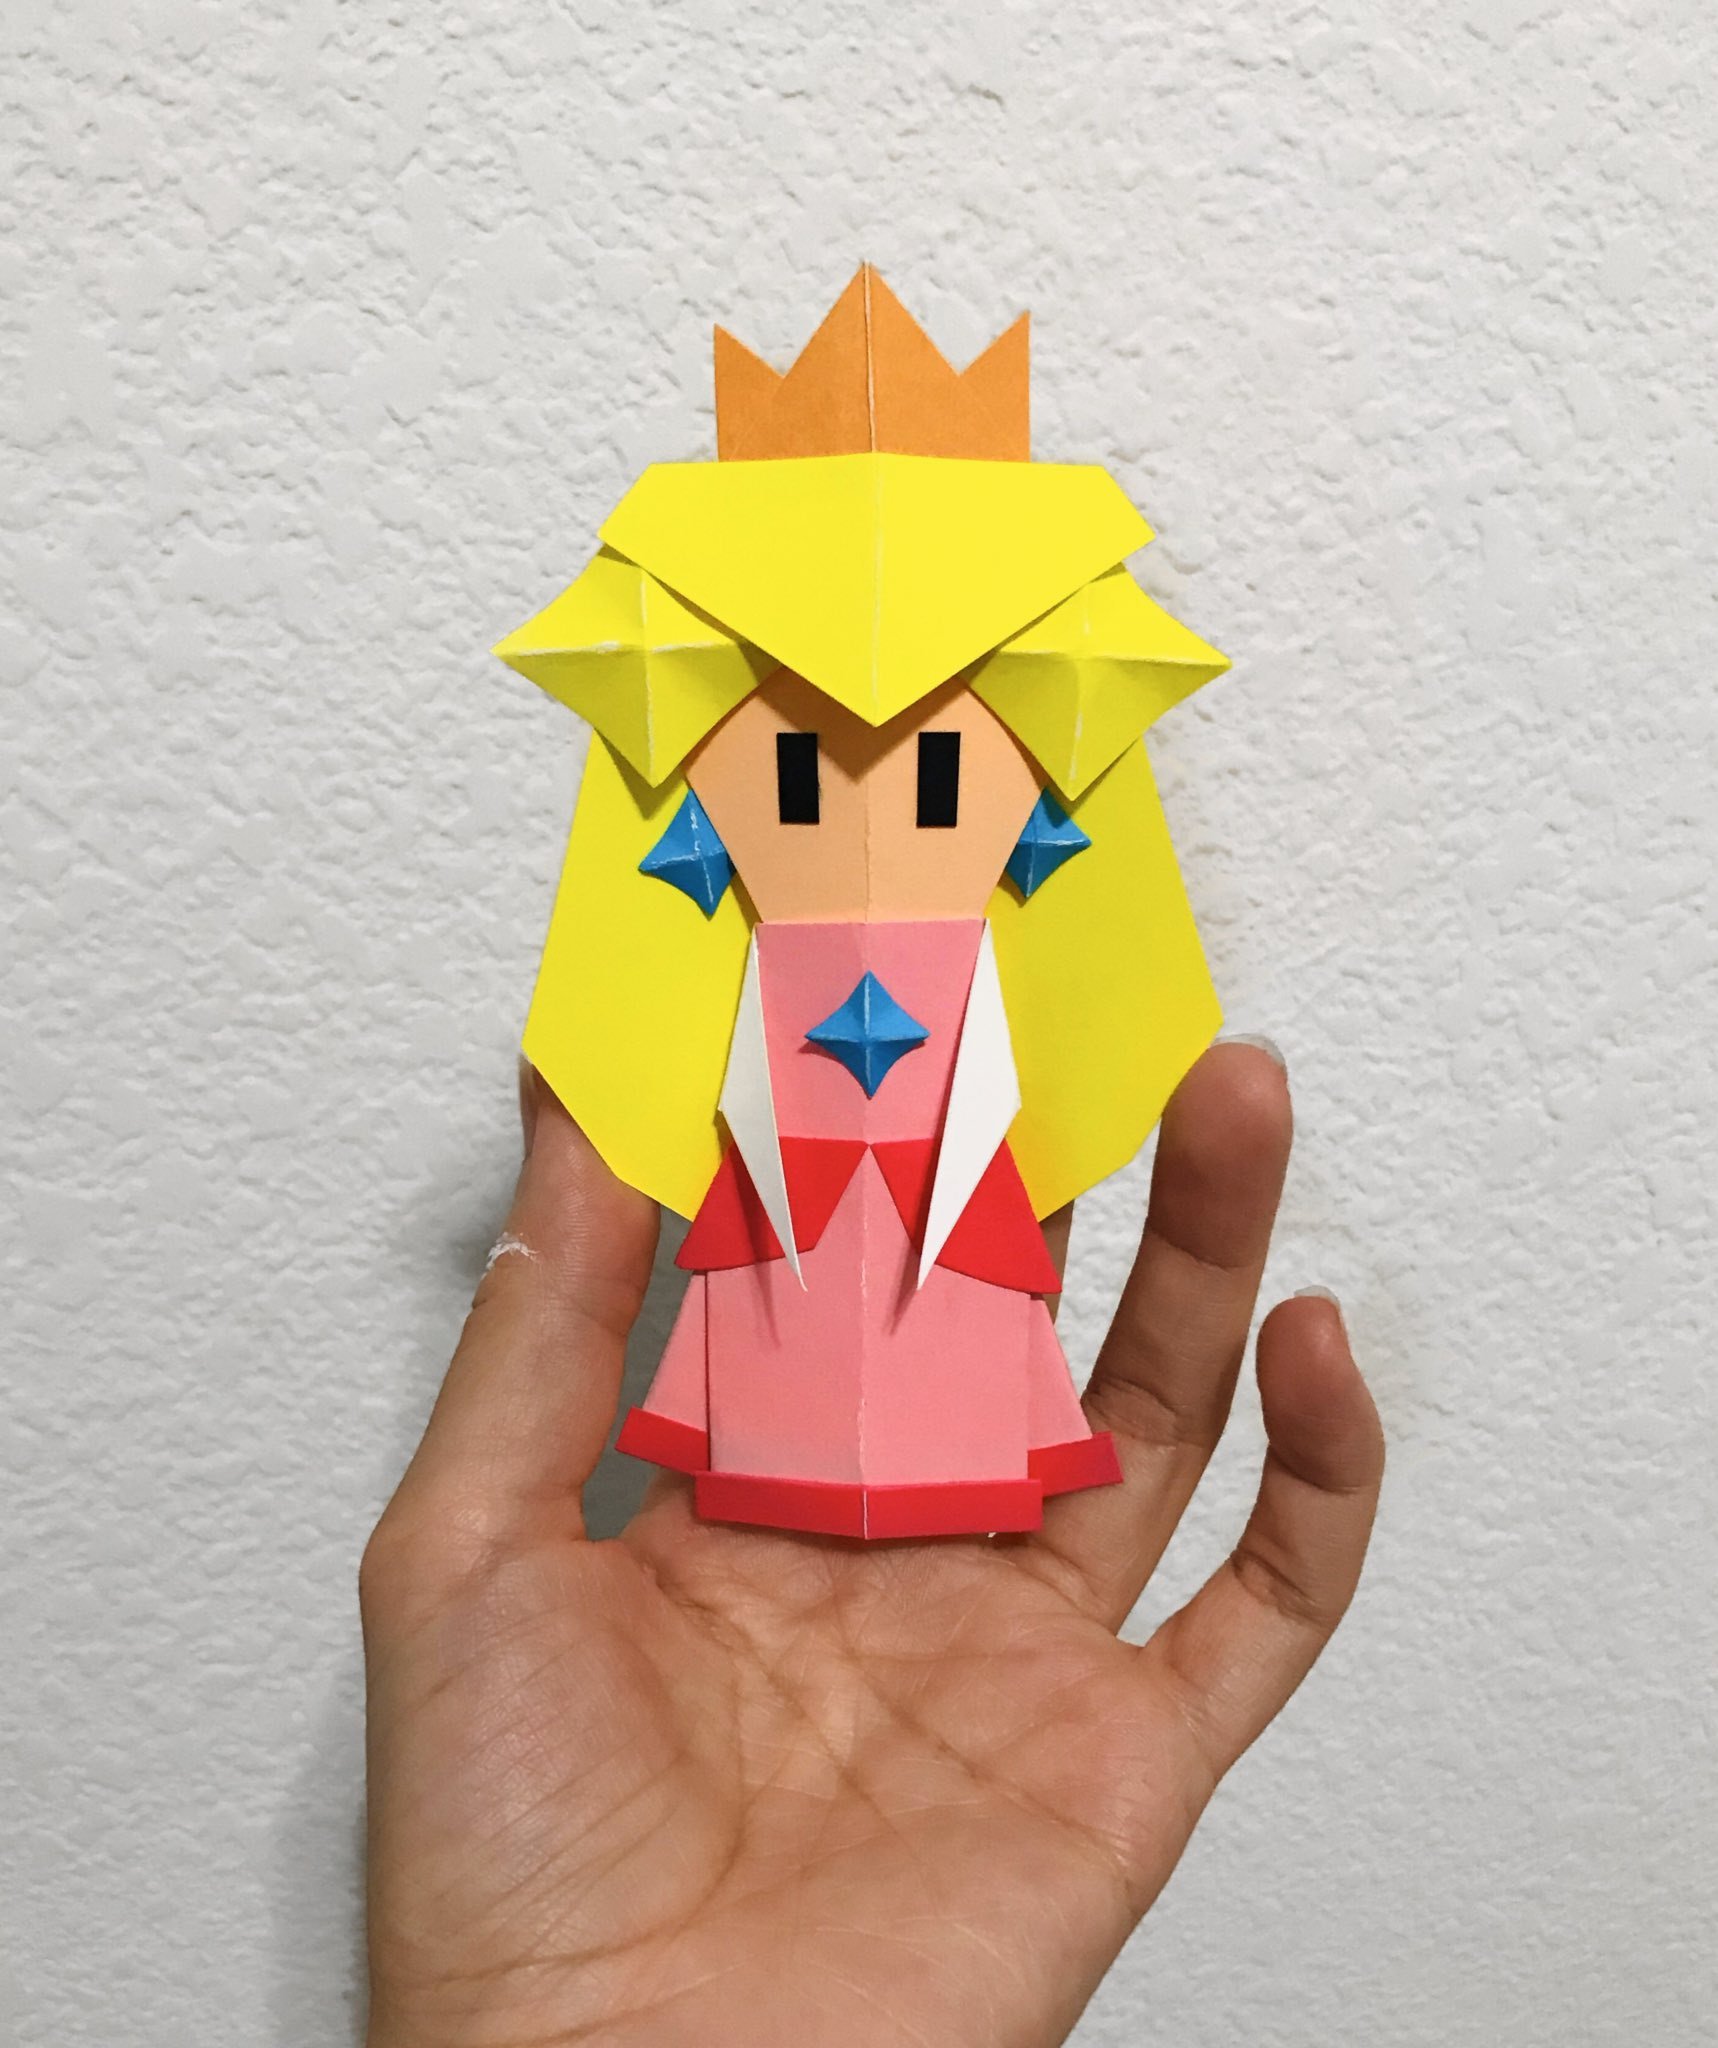 Random: Check Out This Amazing Origami Peach Inspired By Paper Mario